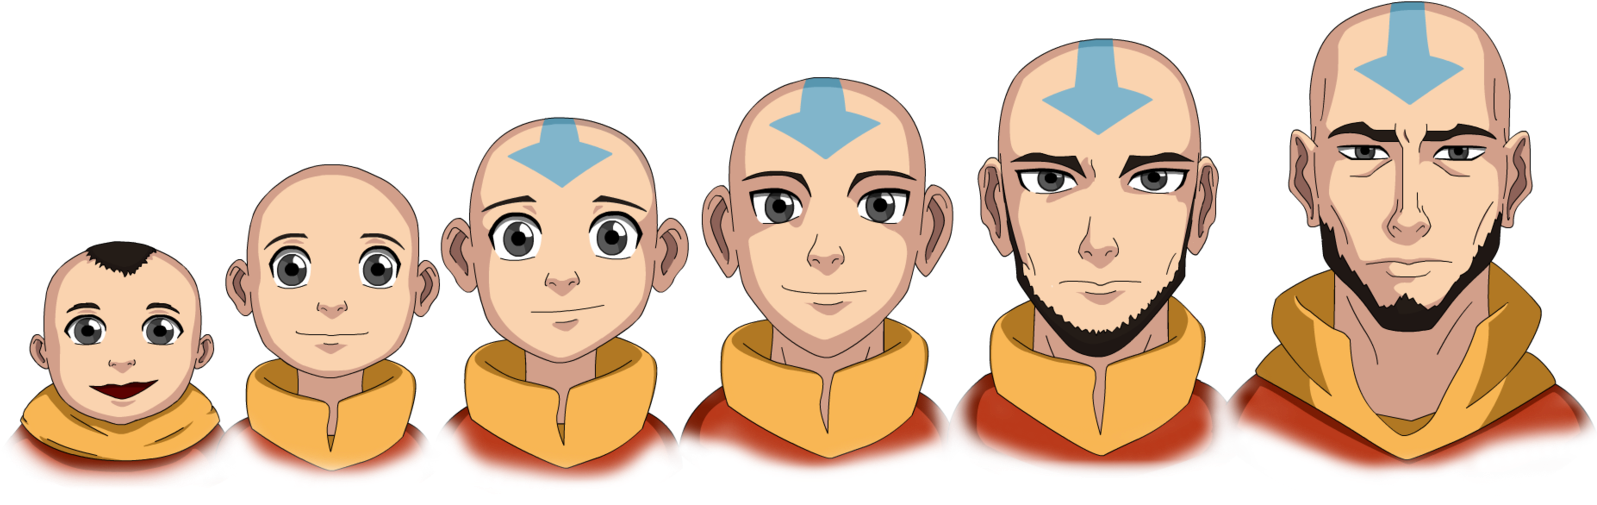 Aang Aging Progression PNG